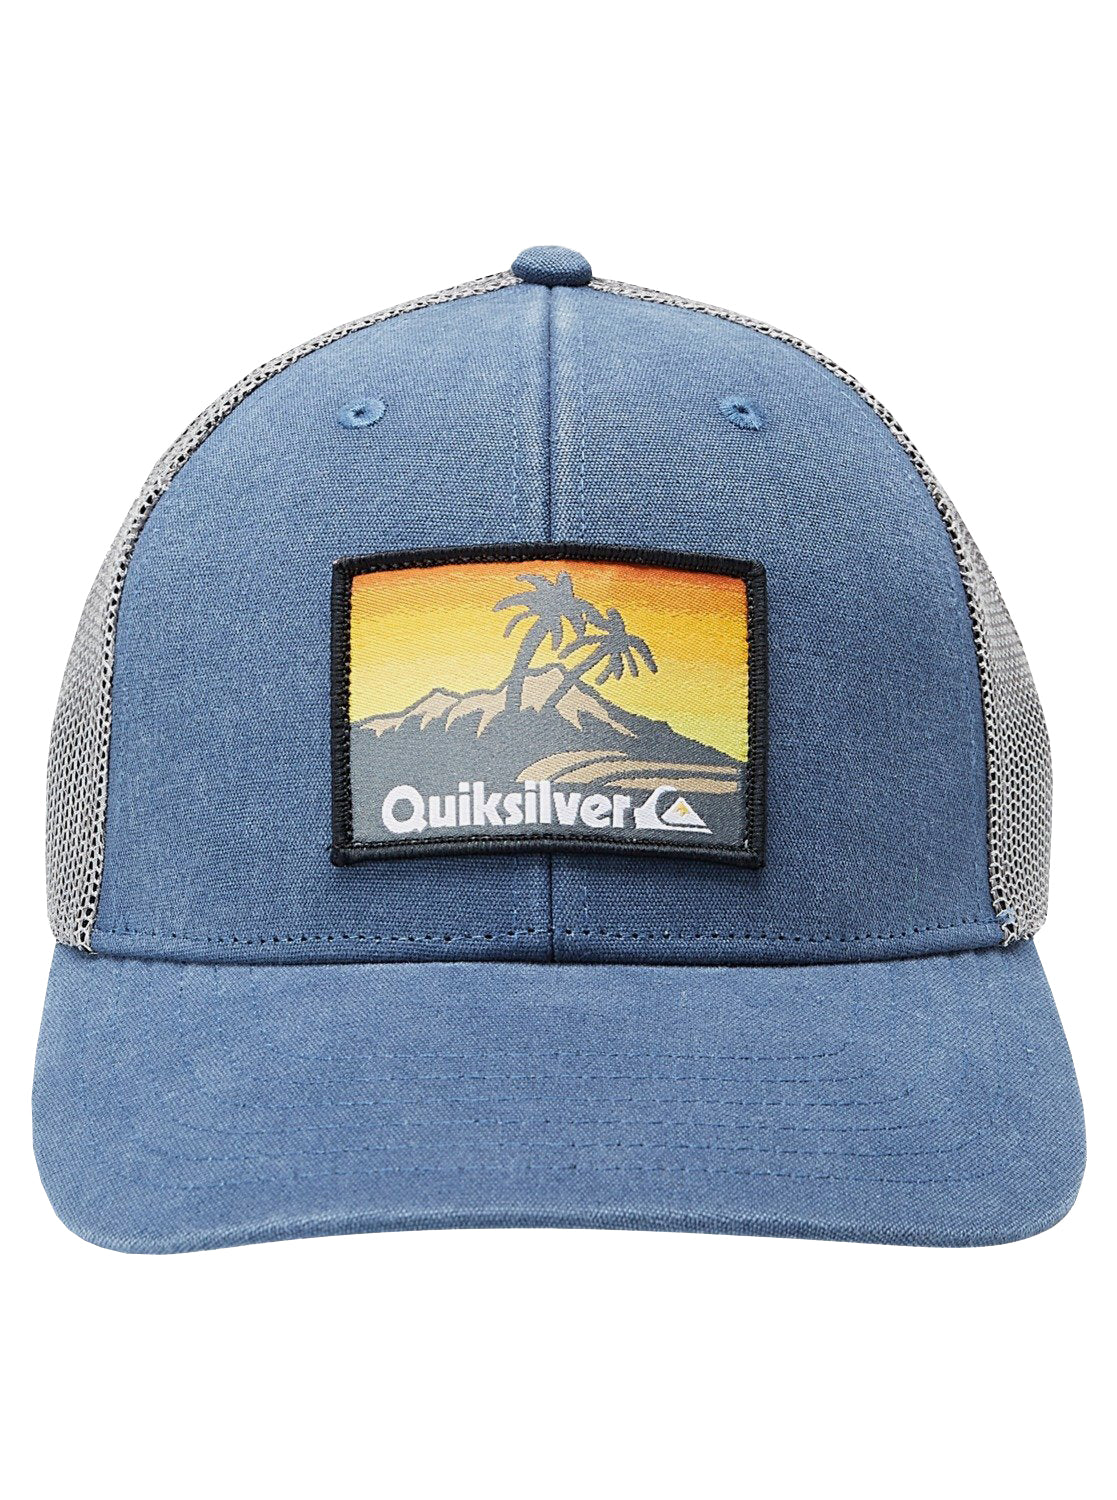 Quiksilver Clean Meanie Snapback Hat KSH0 OS